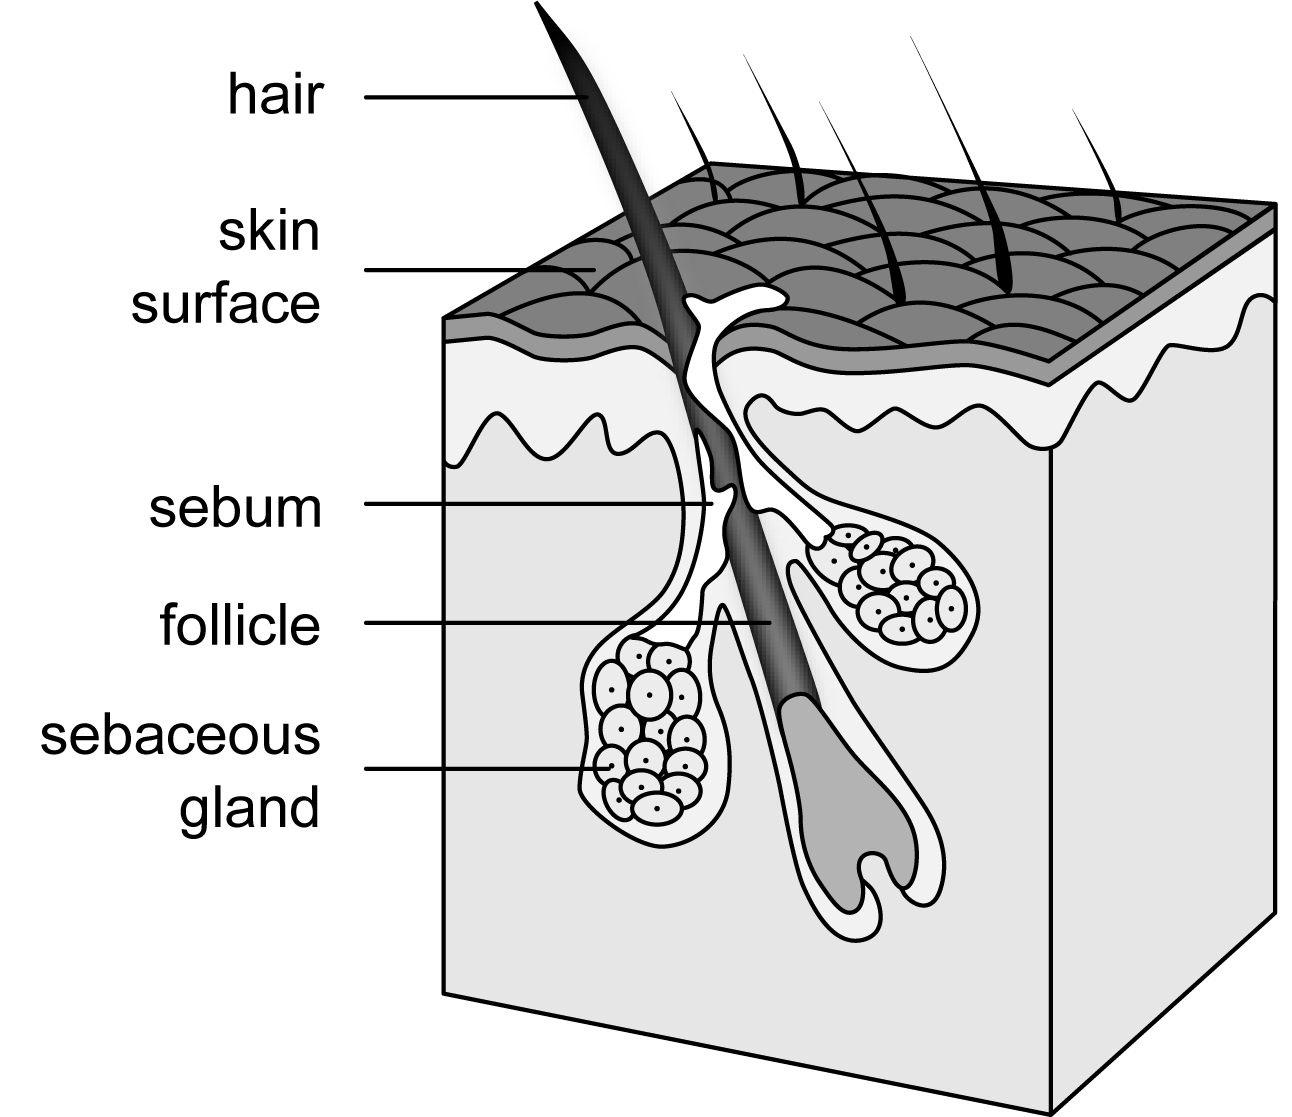 What Are The Parts Of A Hair Follicle